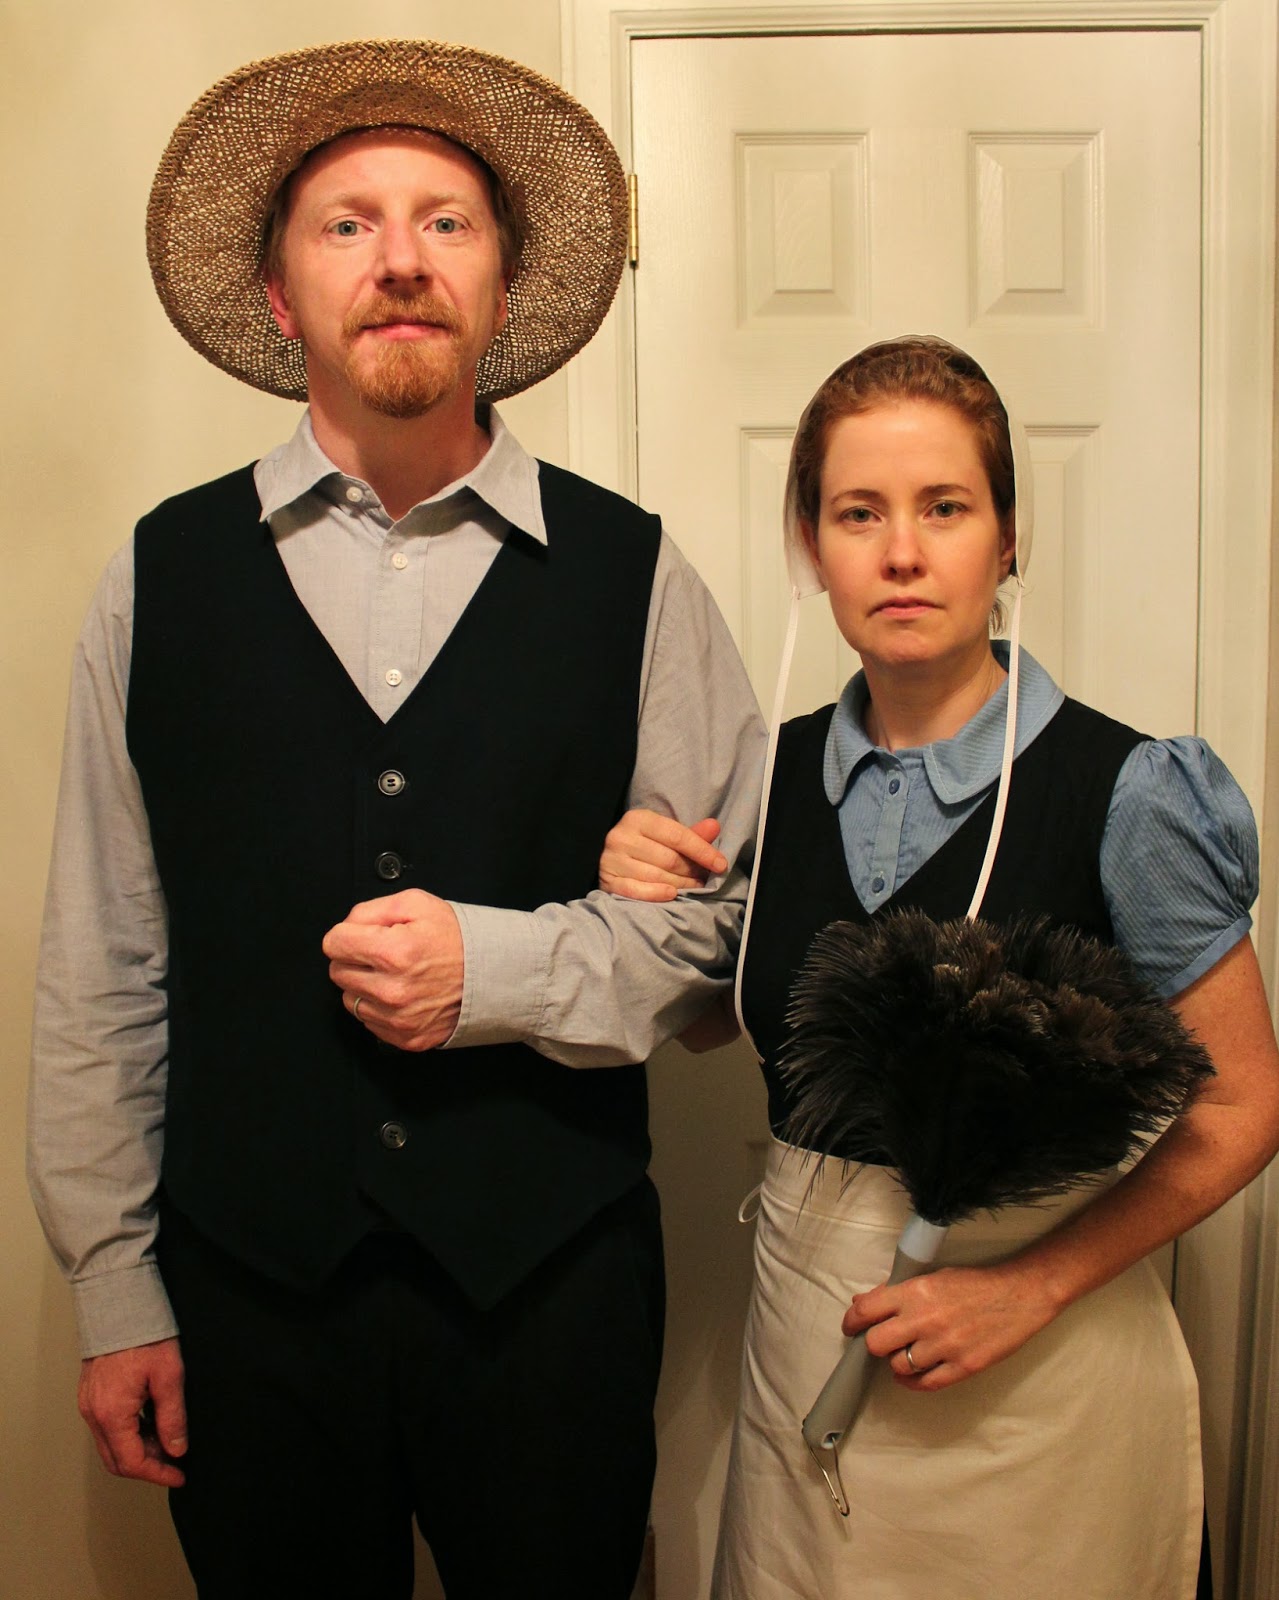 fringe Kinematics intermittent A Sewing Life: Swinging Amish Halloween Couples Get-up